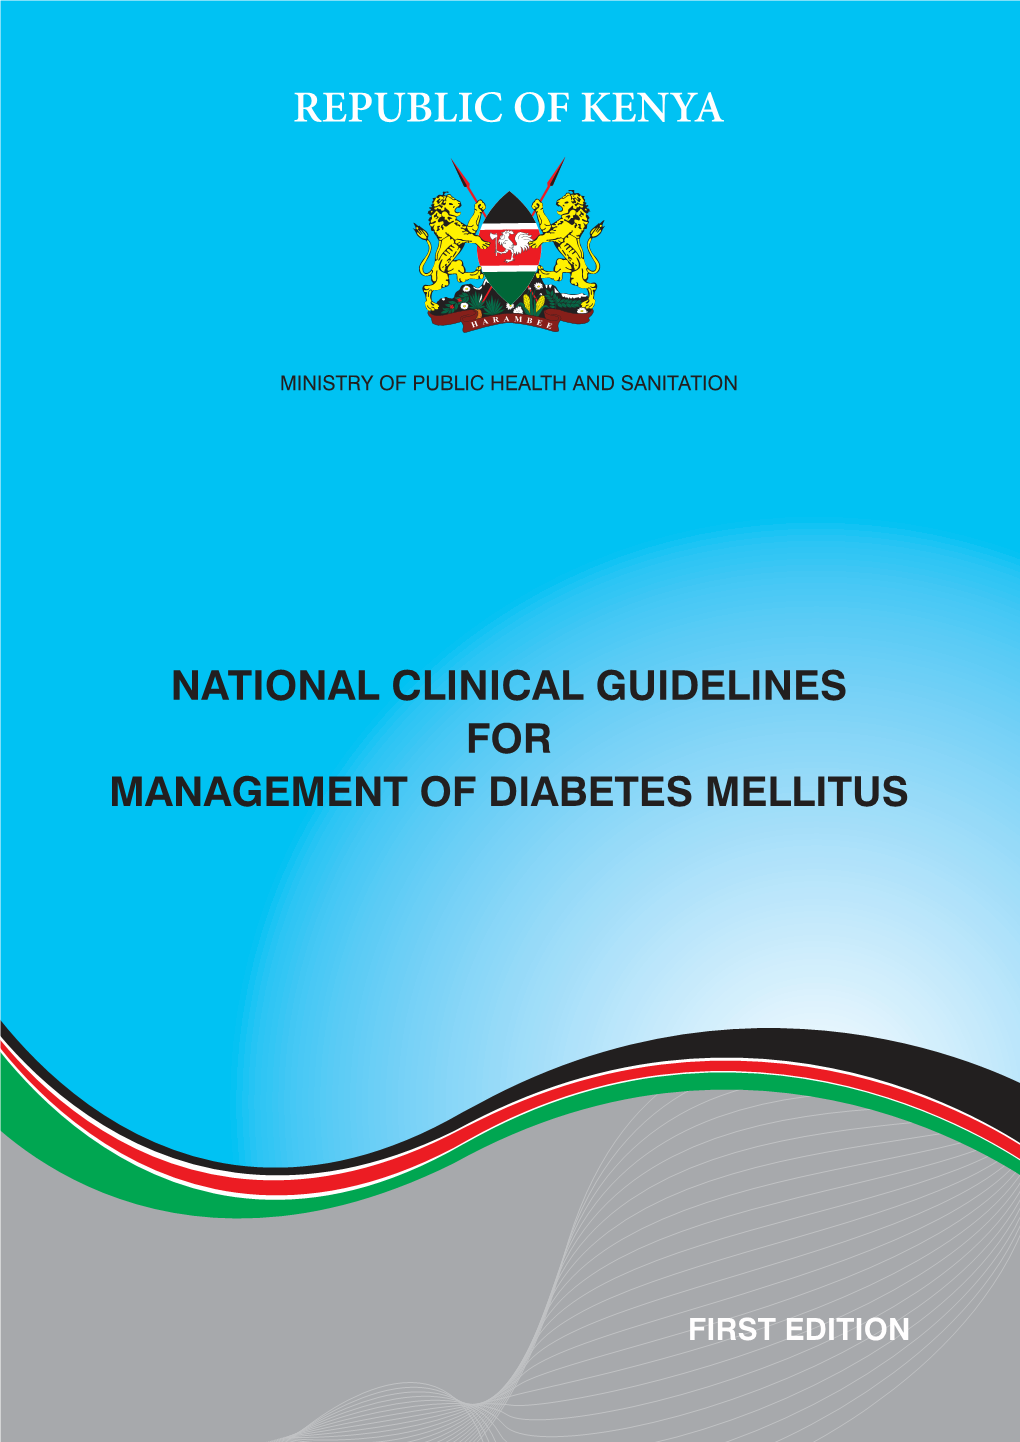 National Clinical Guidelines for Management of Diabetes Mellitus